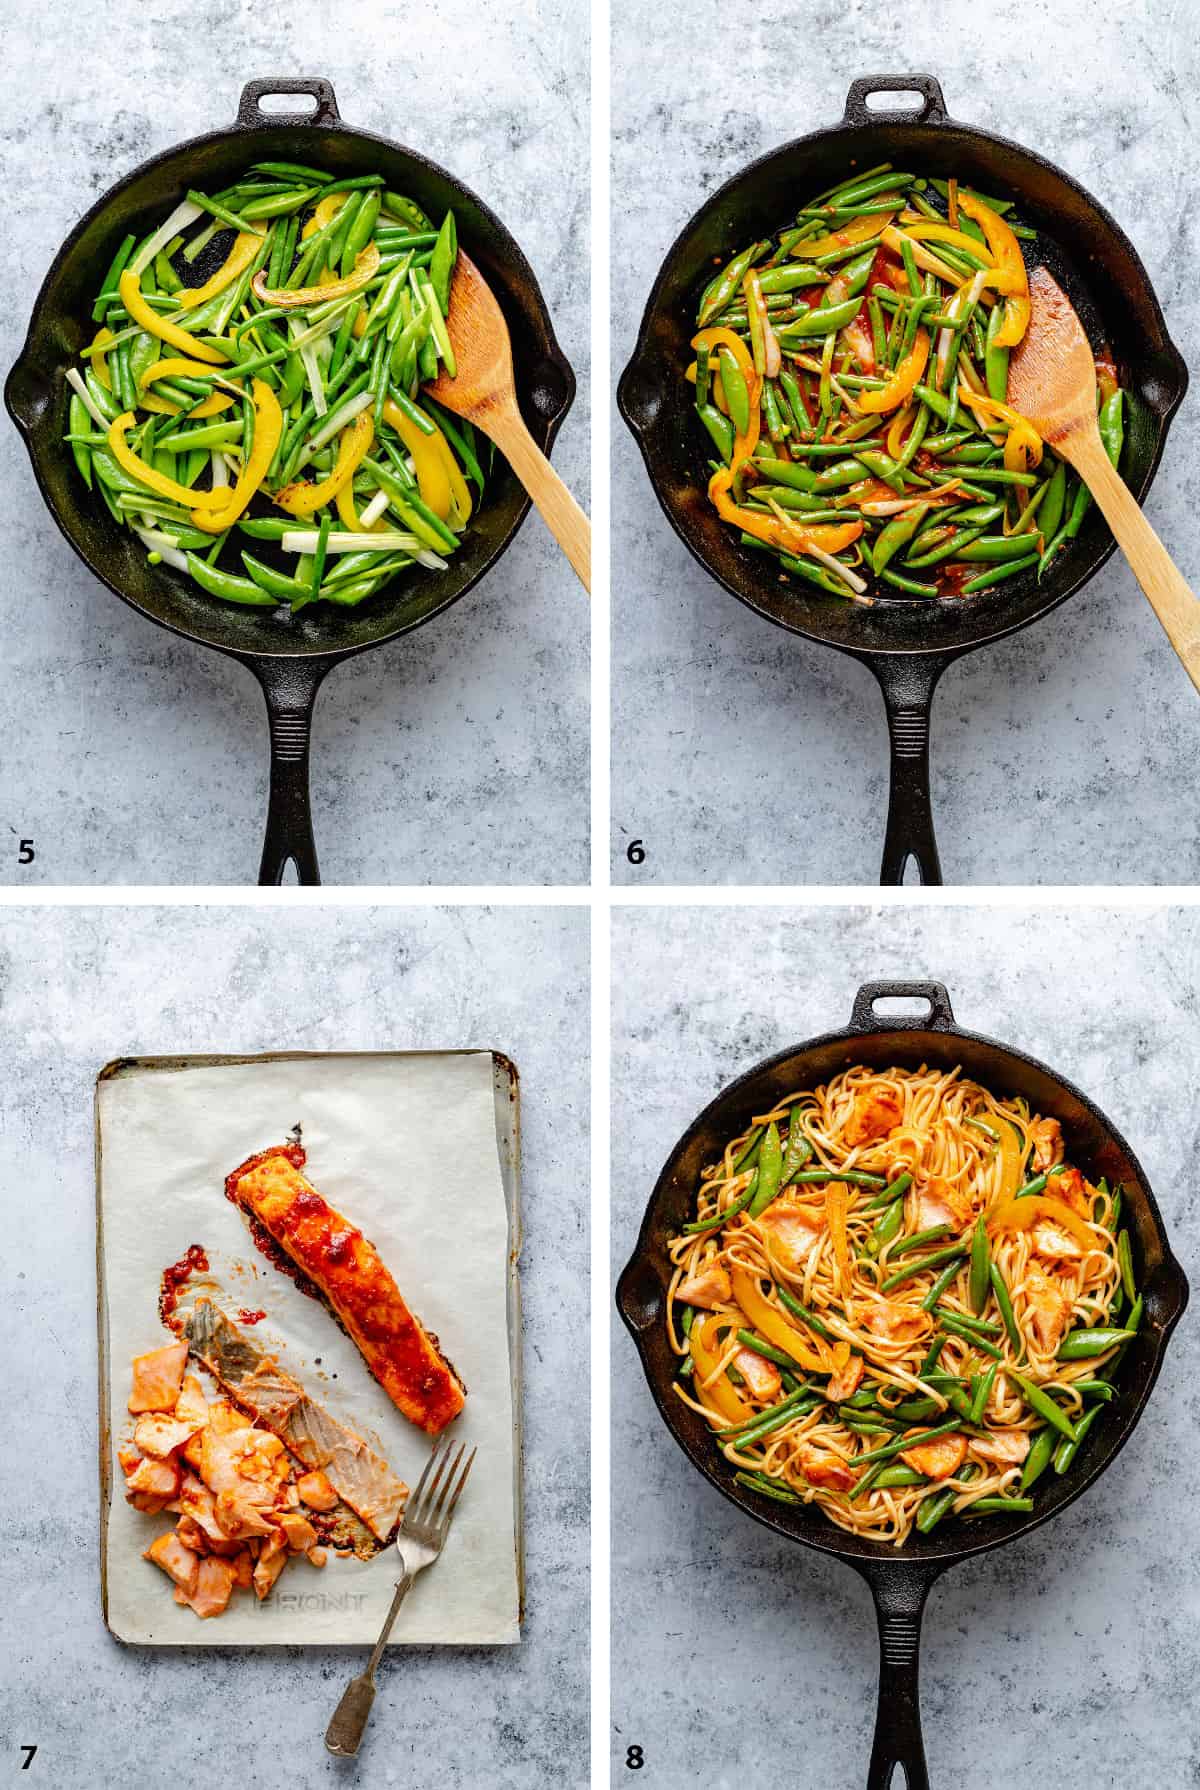 Stir frying veggies in a skillet with sauce, tossing the noodles through with flaked salmon.